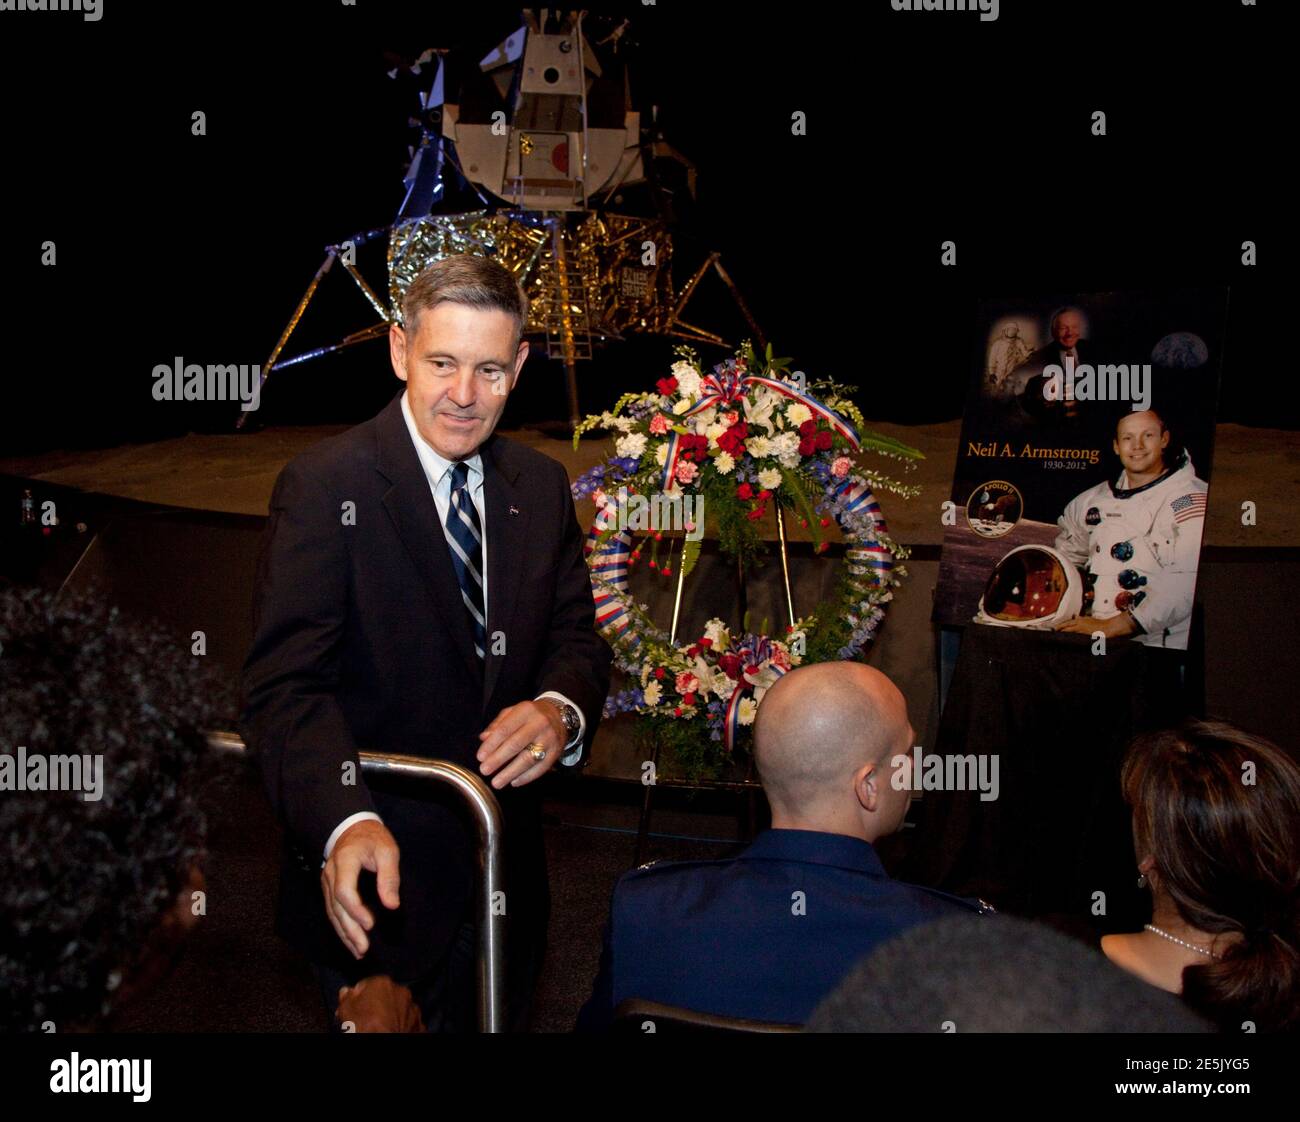 Kennedy Space Center Director Robert Cabana, a retired astronaut, speaks during a memorial service for Neil Armstrong in the Apollo Saturn V Center at Kennedy Space Center, Florida August 31, 2012. U.S. astronaut Armstrong, who took a giant leap for mankind when he became the first person to walk on the moon, has died at the age of 82, his family said on August 25, 2012. Attendees of the three minute ceremony toured the space center after paying their respects for Armstrong. REUTERS/Michael Brown (UNITED STATES - Tags: SCIENCE TECHNOLOGY TRANSPORT OBITUARY) Stock Photo